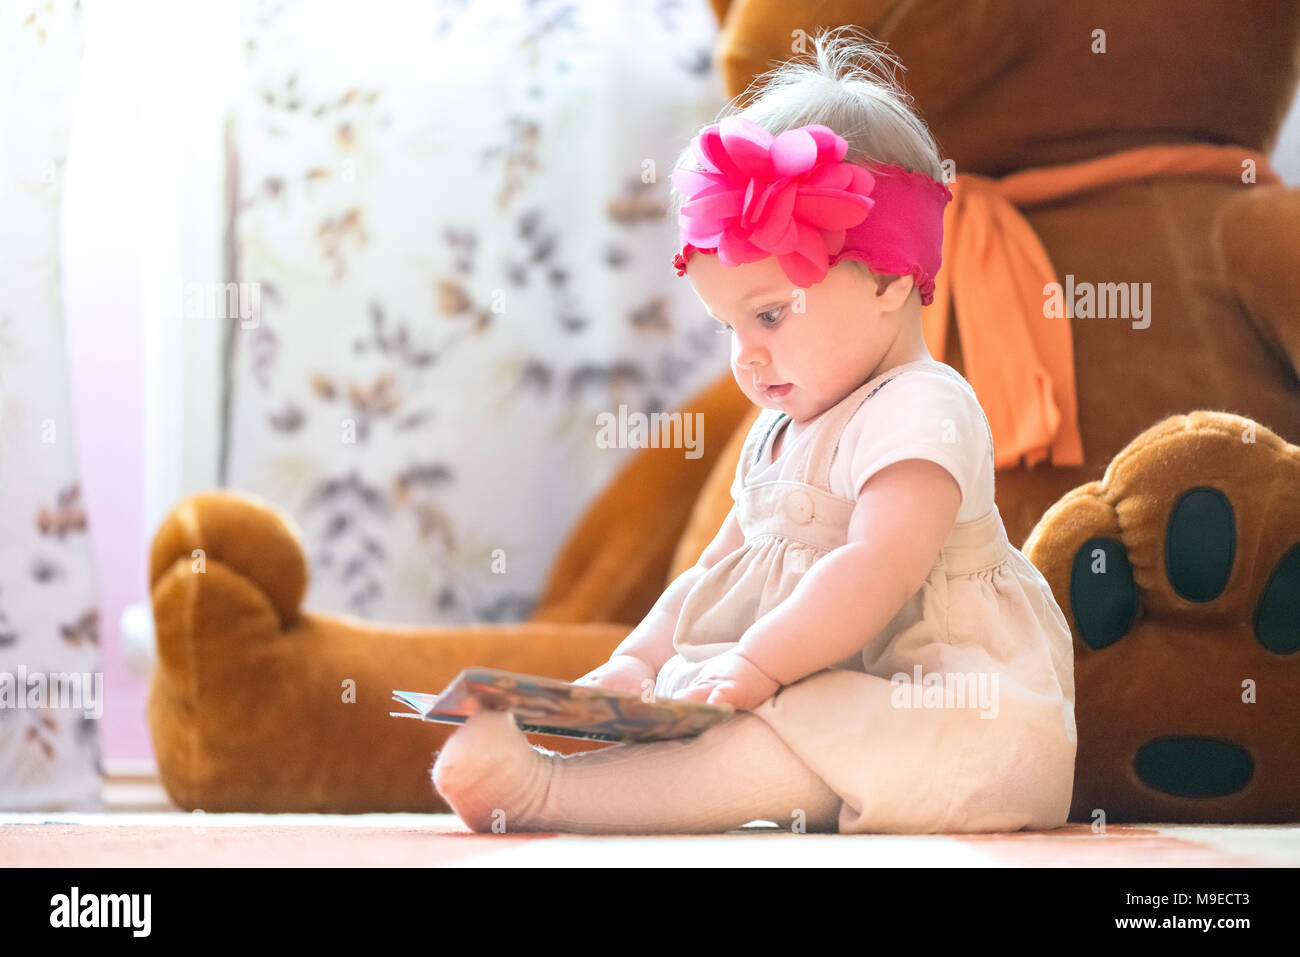 10 months old baby girl examining a book Stock Photo